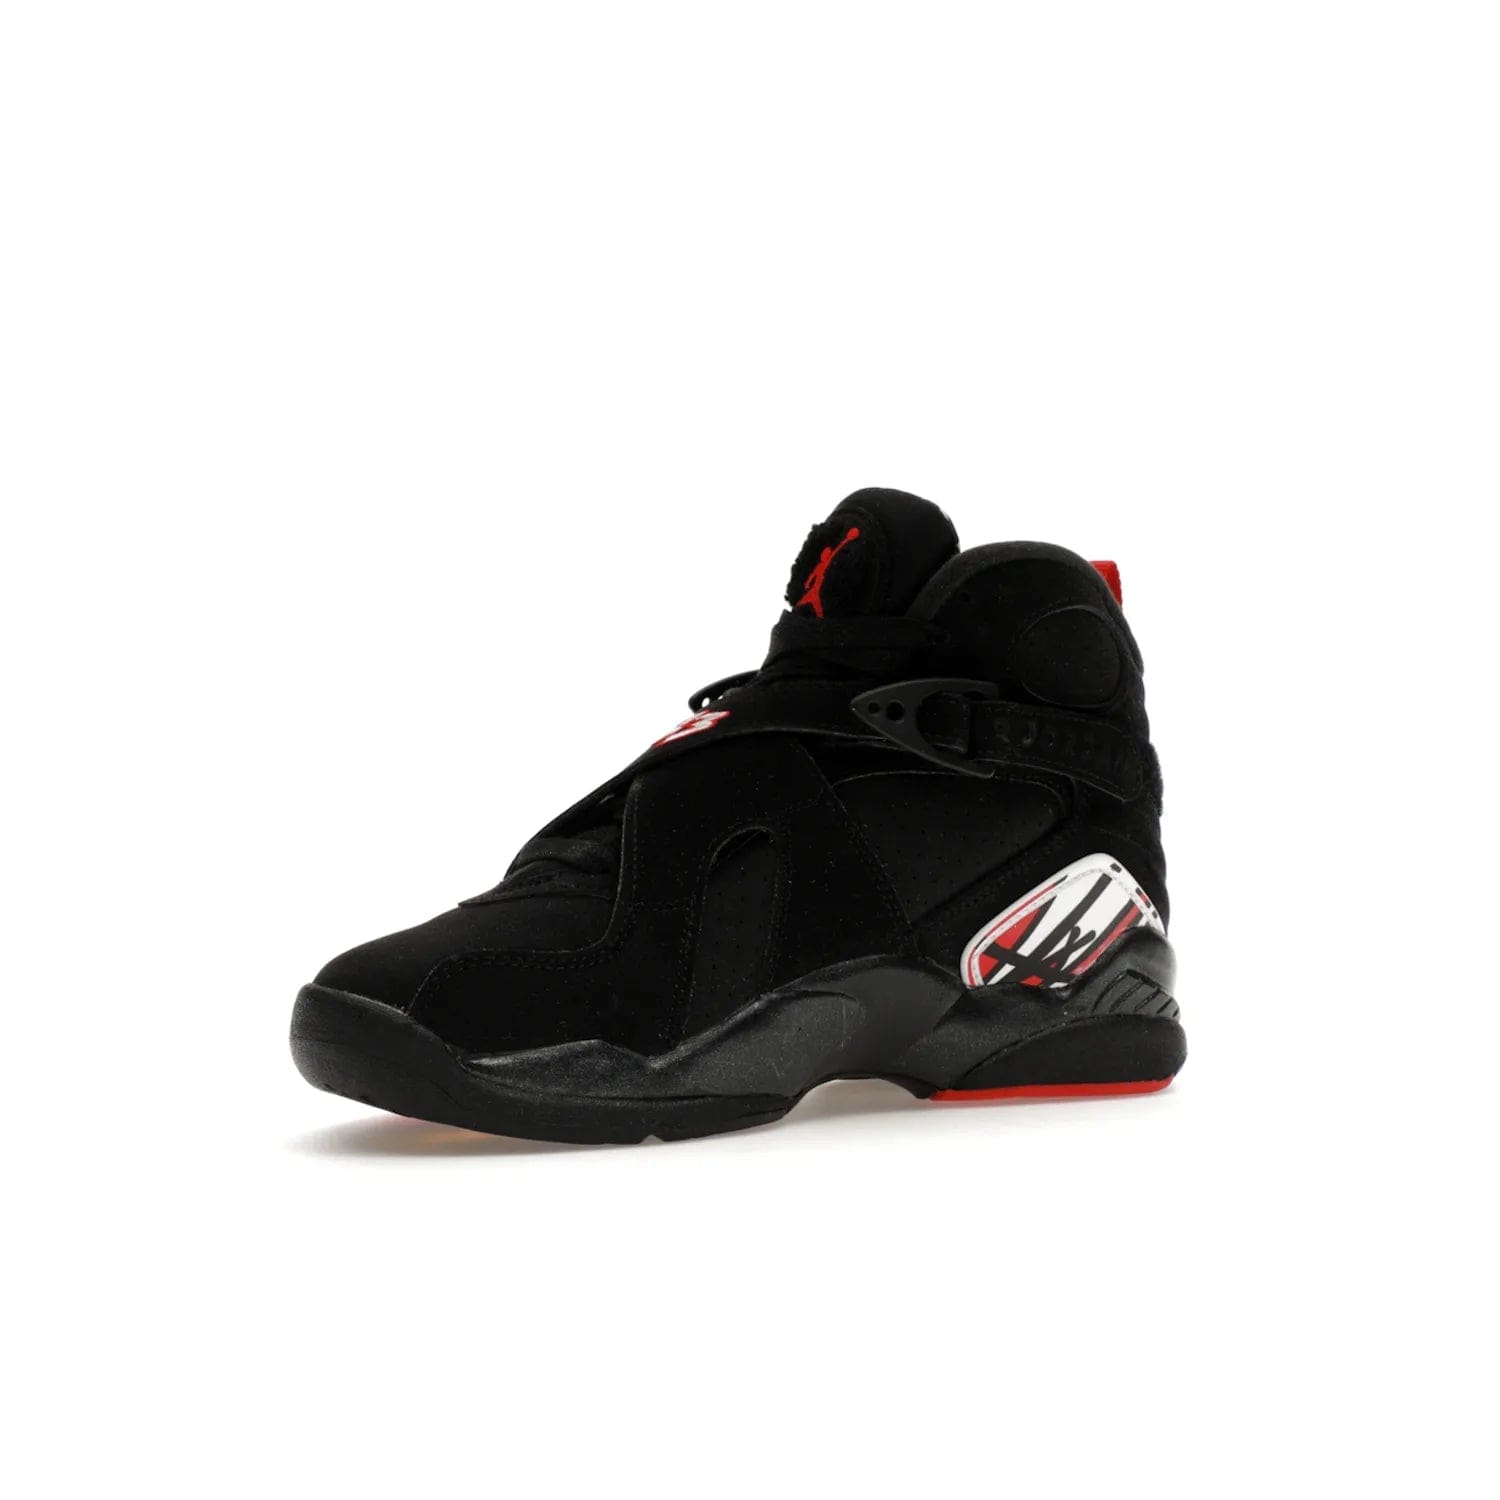 Jordan 8 Retro Playoffs (2023) (GS) - Image 16 - Only at www.BallersClubKickz.com - Sneaker lovers, the new Jordan 8 Retro Playoffs (2023) (GS) features black, true red, and white colors for a modern and eye-catching design. Comfort and style combine for an unforgettable look, releasing in 2023.